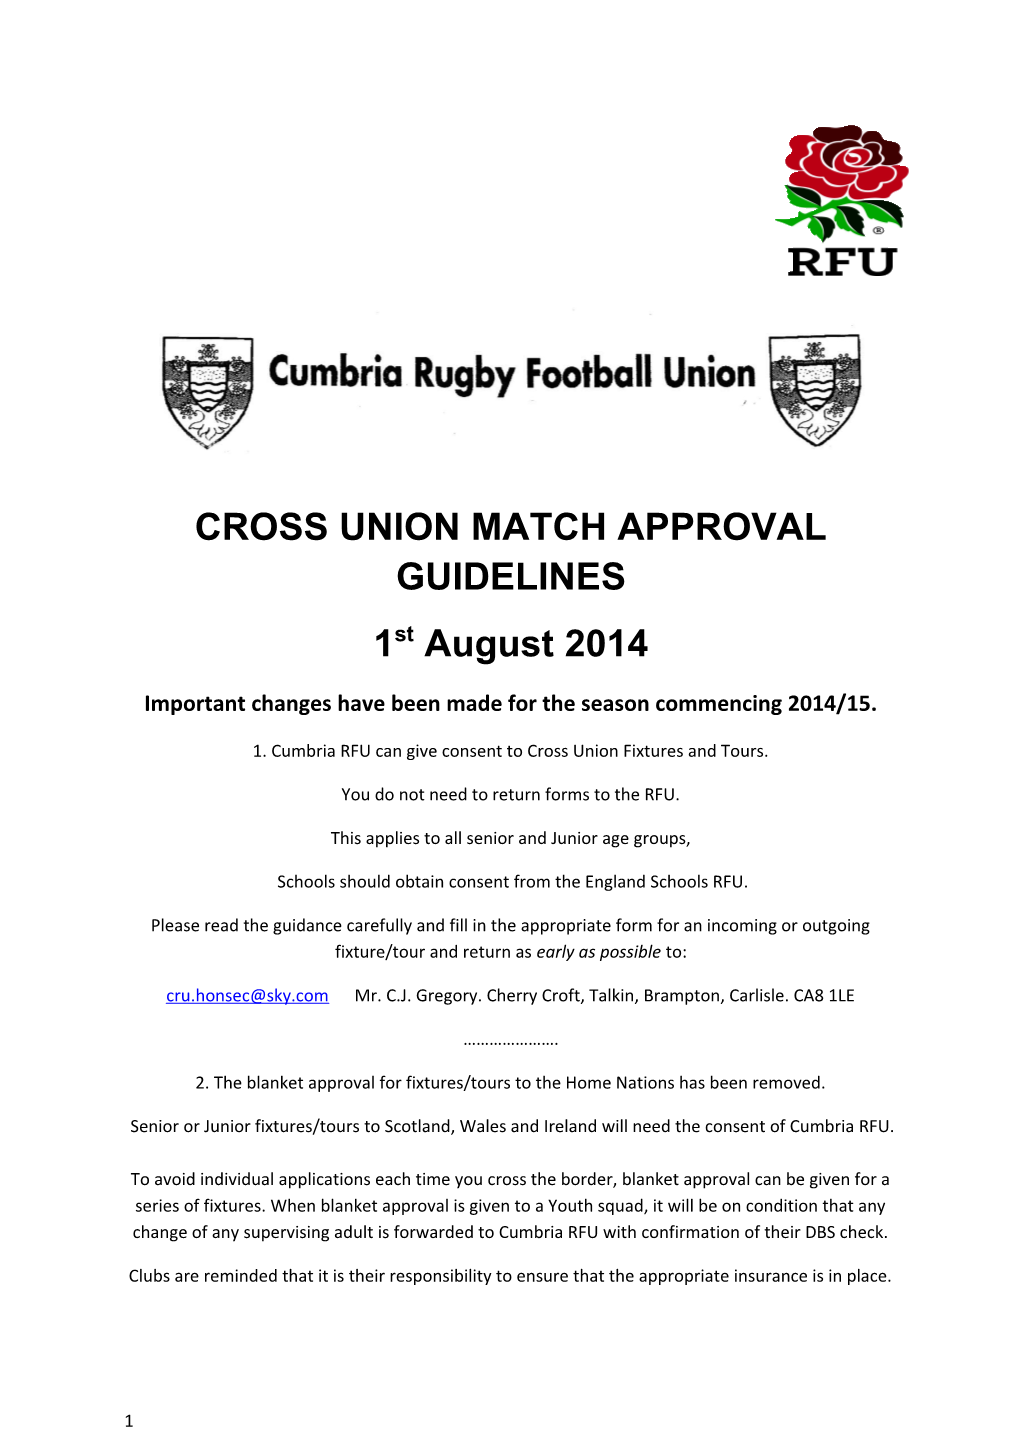 Cross Union Match Approval Guidelines